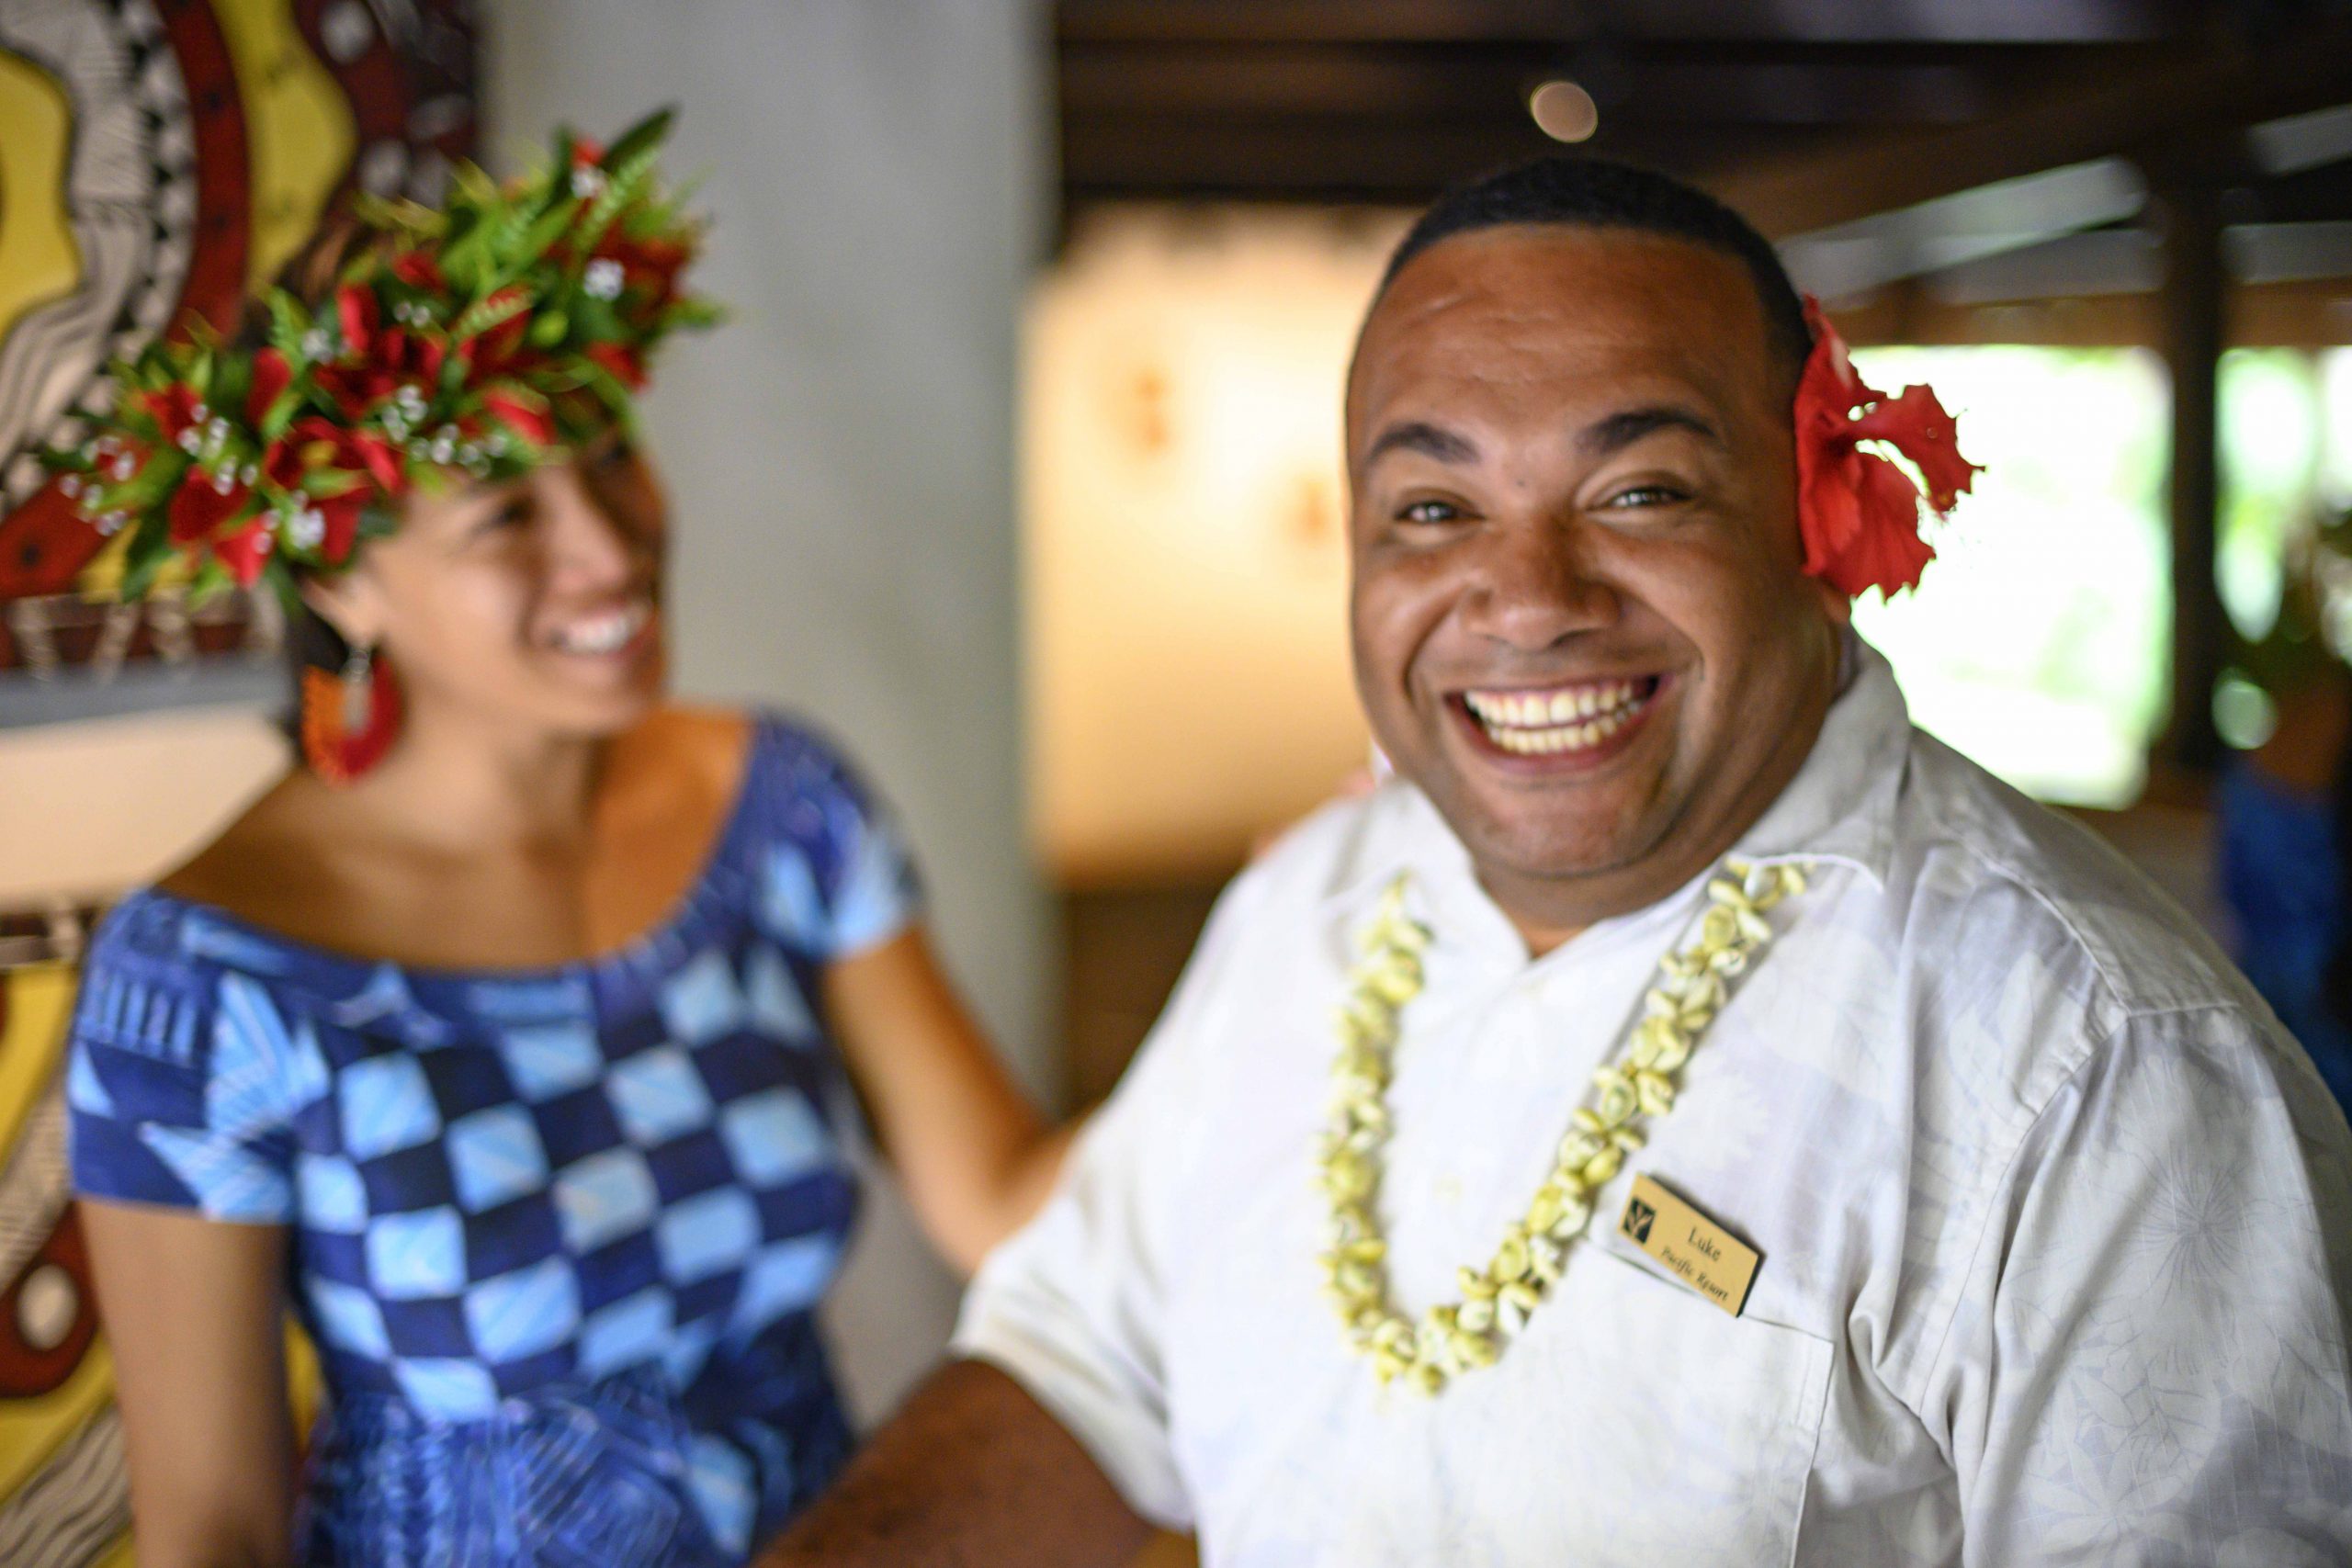 an image capturing two happy guest services agents smiling away, showcasing what Pacific Islanders are known for